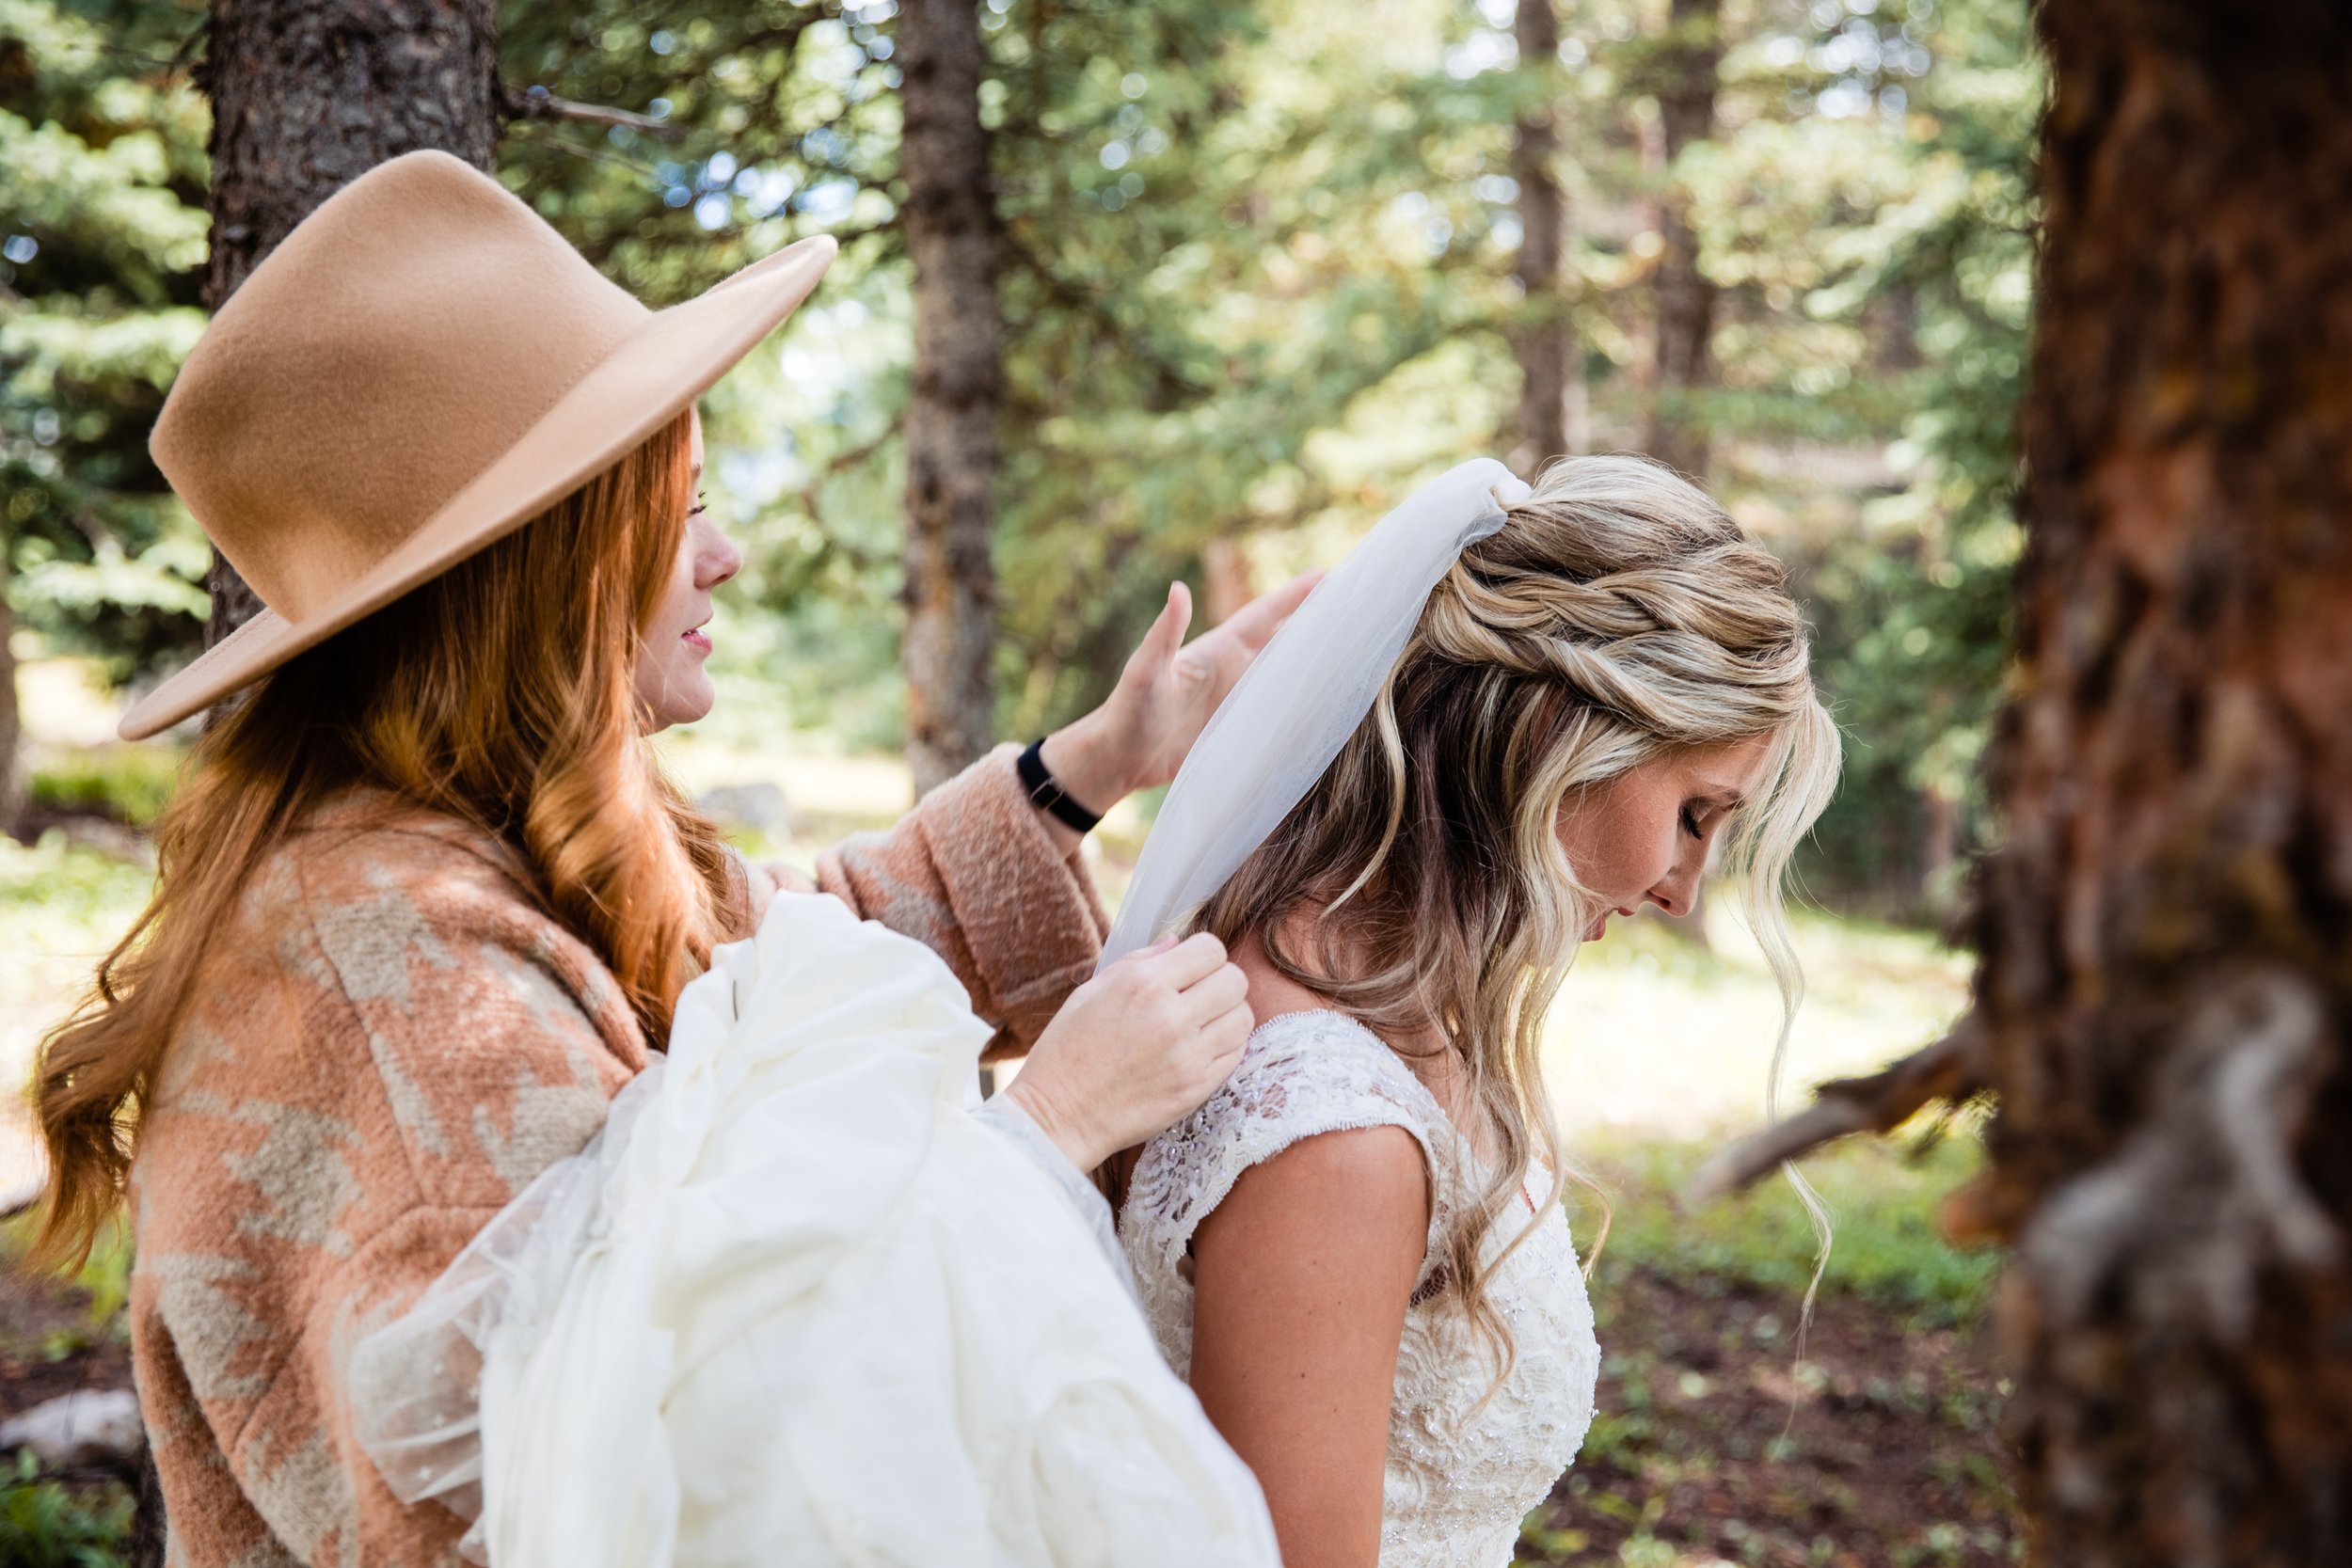  Silverton Colorado Adventure elopement photogrpaher Alexid Hubbell Photogrpahy  Bride putting on wedding dress in forest   ©Alexi Hubbell Photography 2022  August Elopement in Colorado 